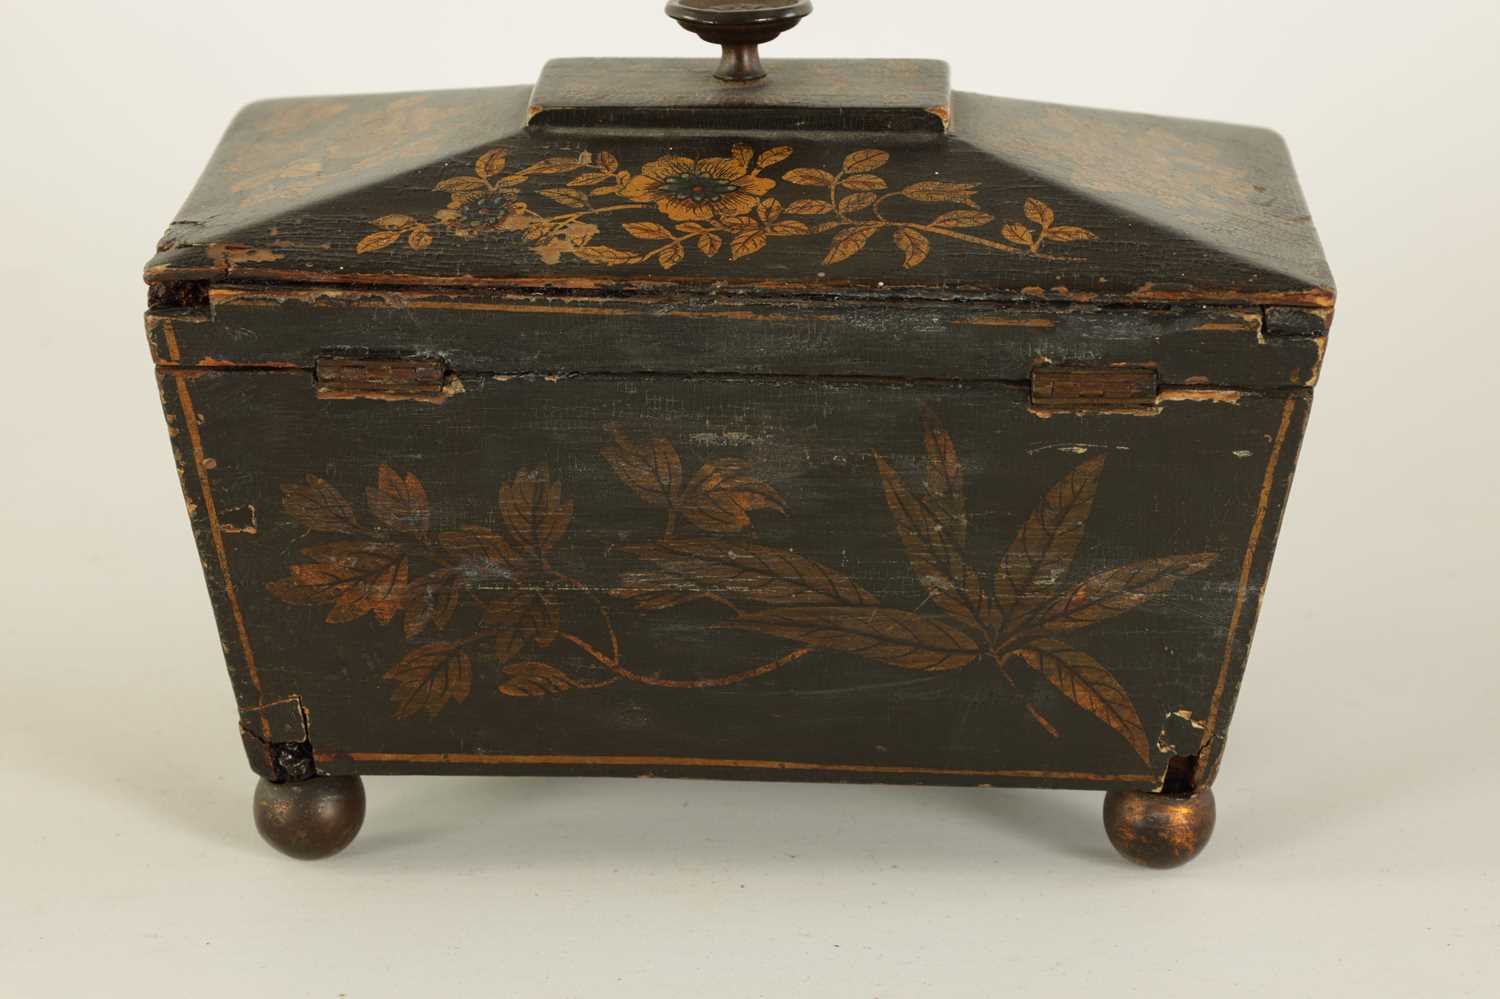 A LATE GEORGIAN CHINOISERIE DECORATED BLACK LACQUER SARCOPHAGUS TEA CADDY - Image 6 of 8